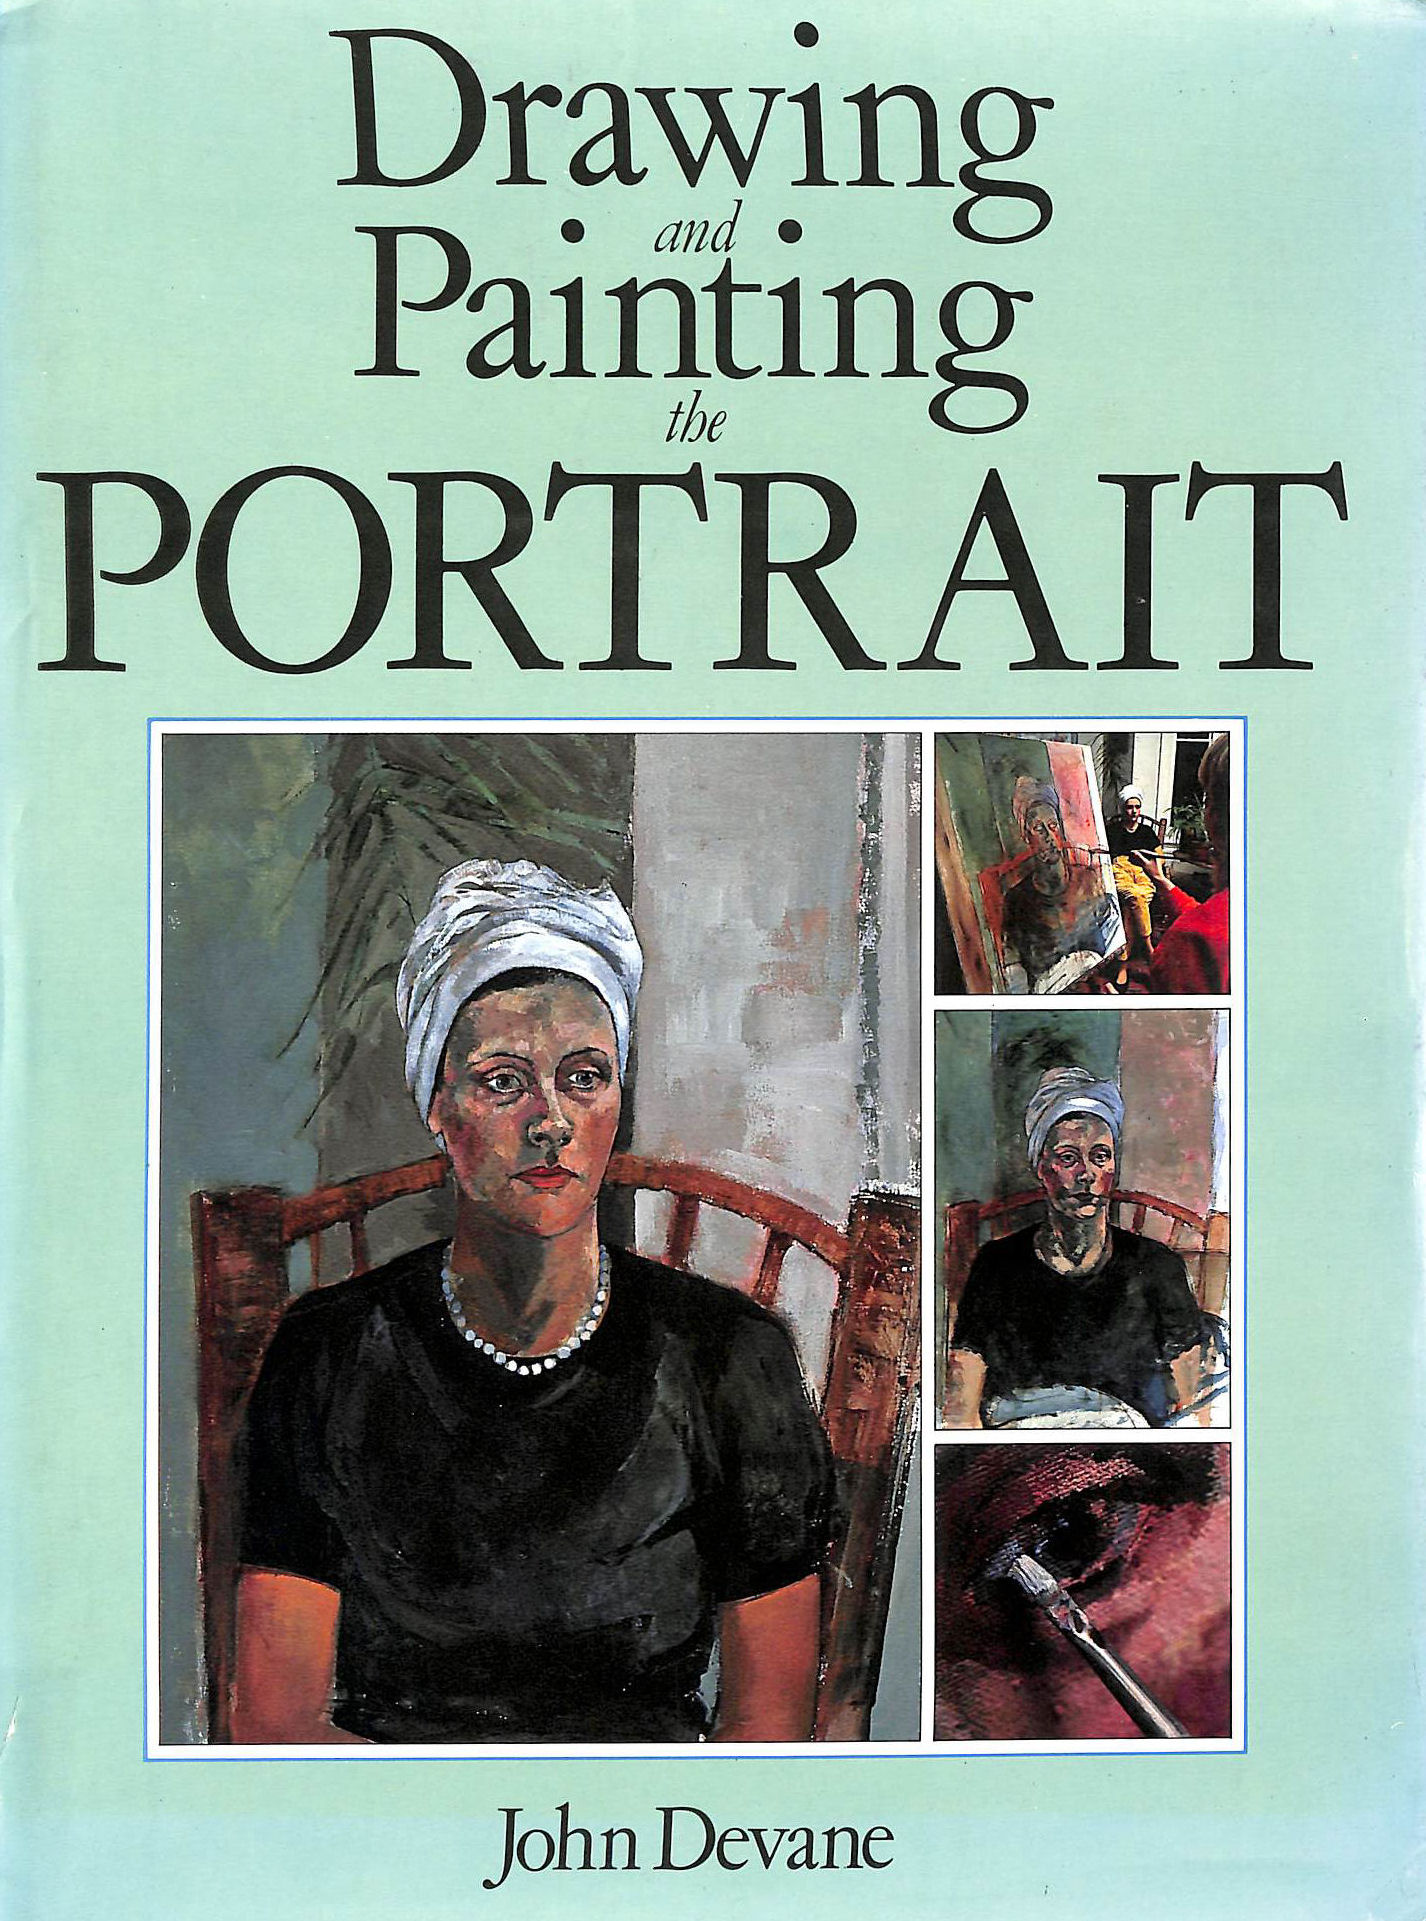 DEVANE, JOHN - Drawing and Painting the Portrait